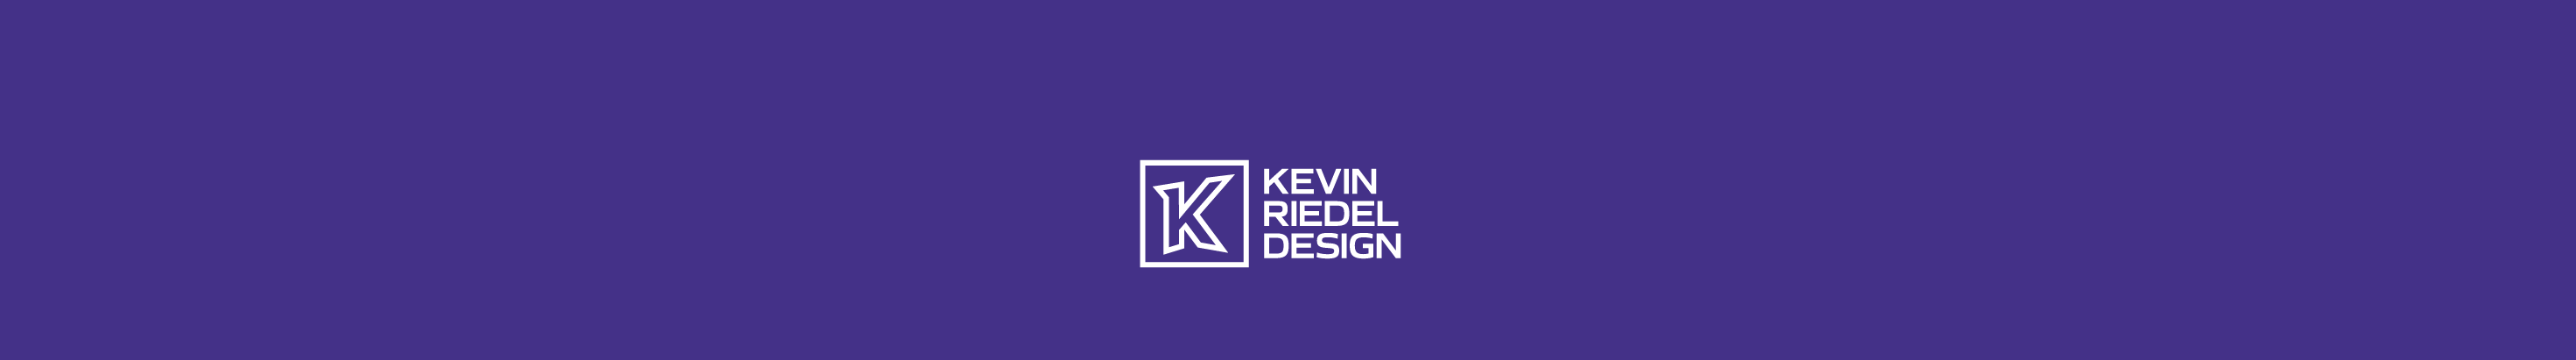 Kevin Riedel's profile banner